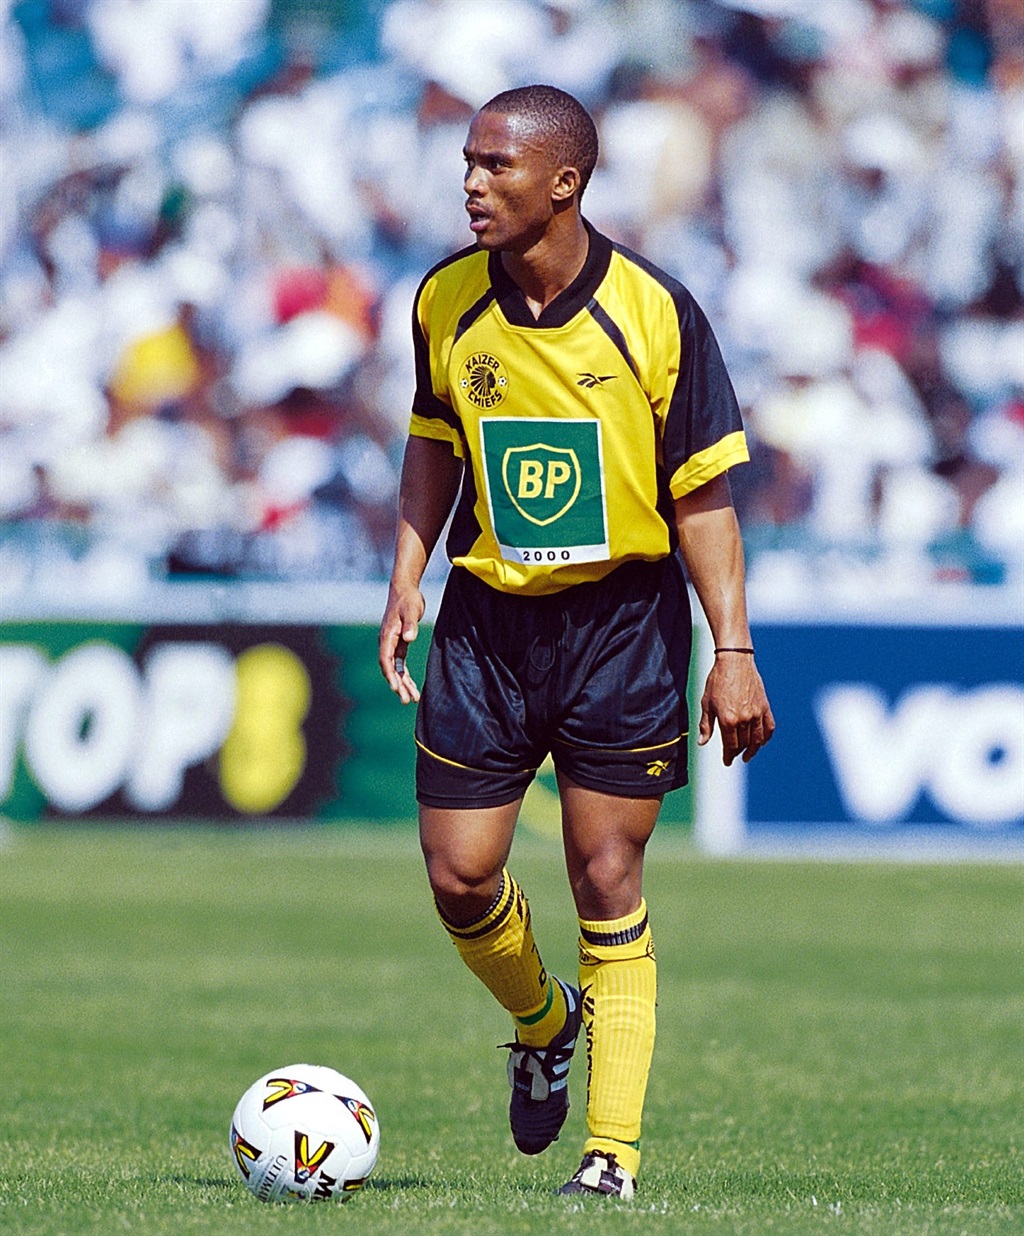 Themba Seli during the BP Top 8 3rd/4th place play-off at FNB Stadium in August 2000. 